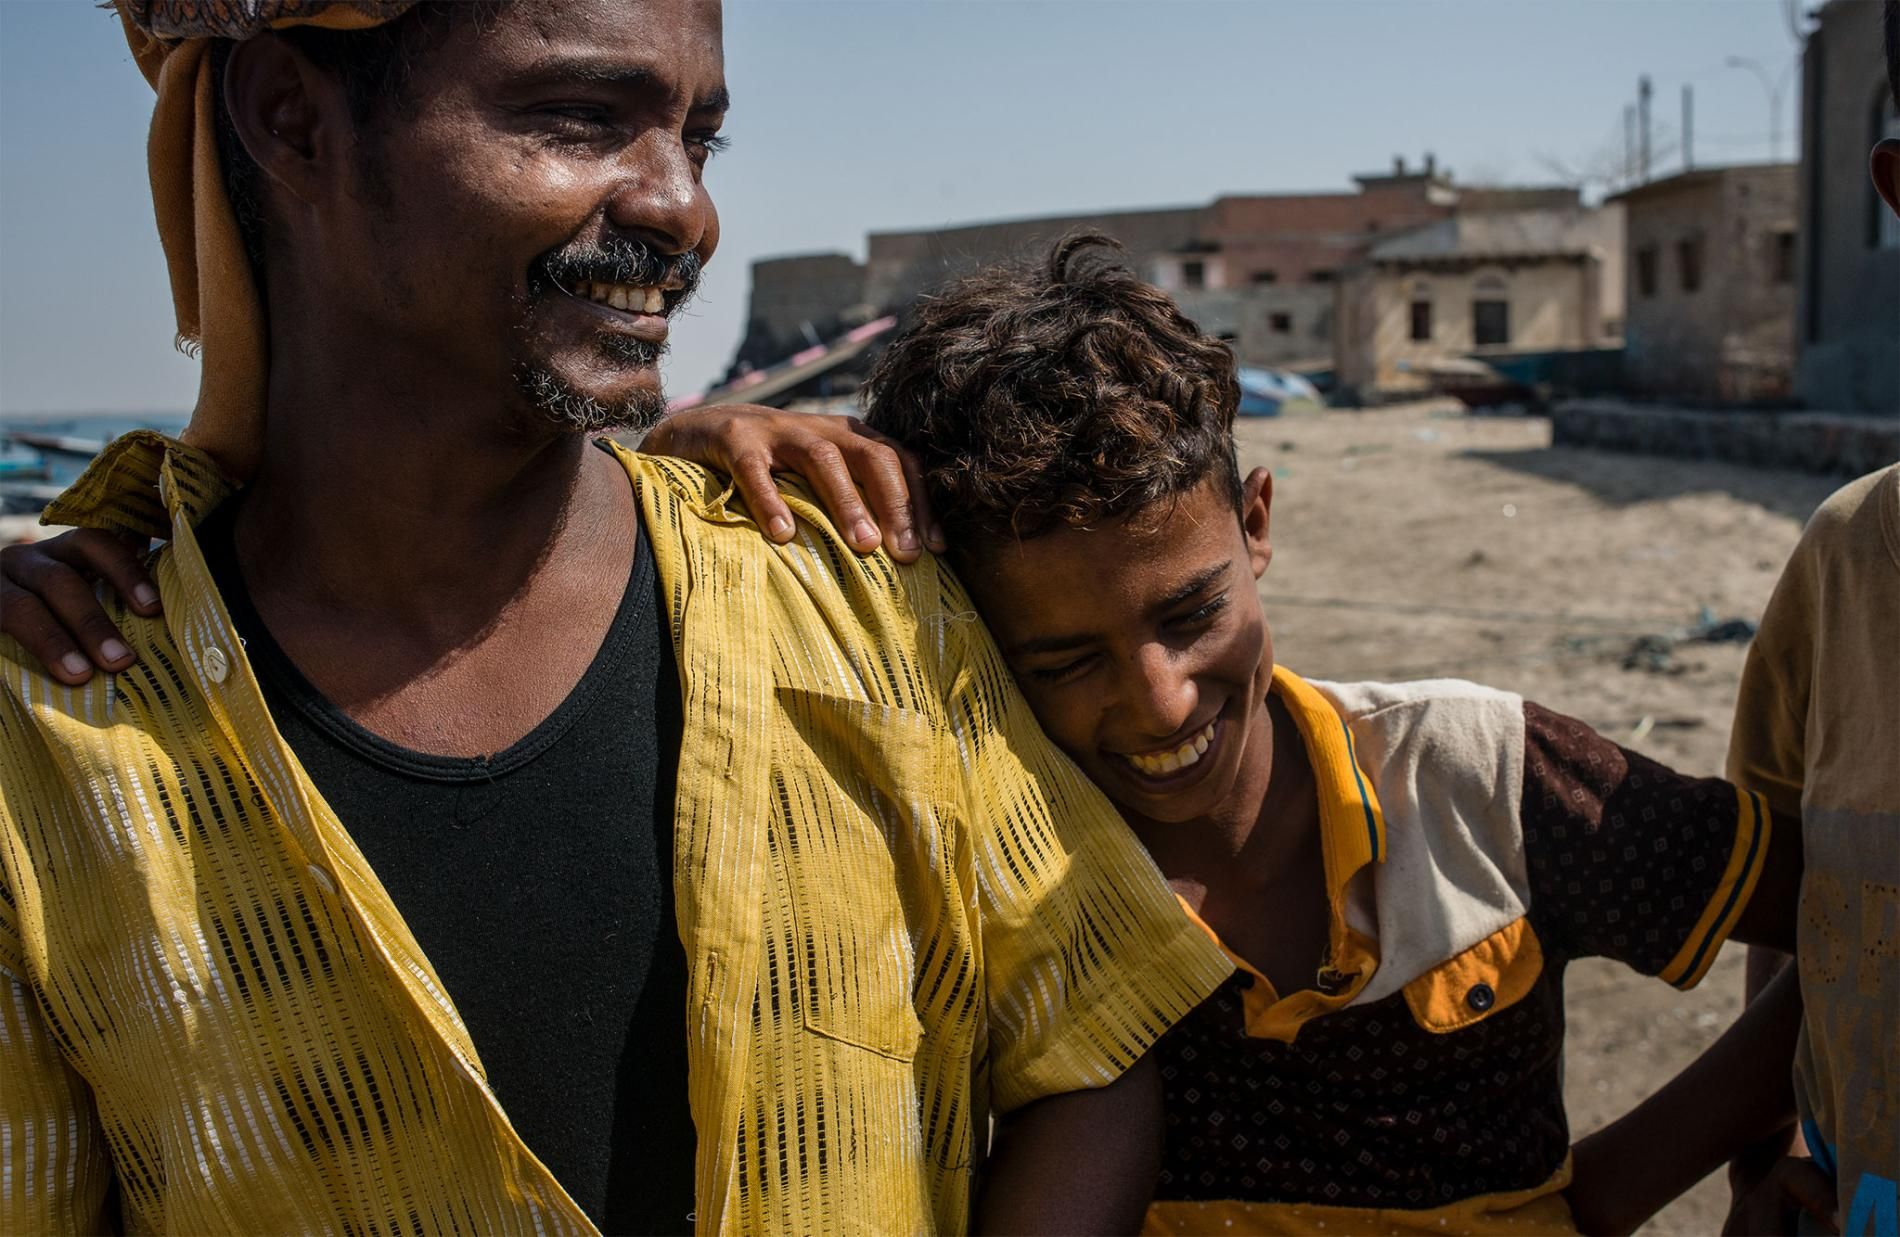 Shafai Saleh Hadi (left) laughs with local boys on the shore of Bir Fuqum. As a first-generation fisherman, he sees the job as a better route for his sons than attending school, since employment is incredibly scarce in Yemen. Image by Alex Potter. Yemen, 2018.